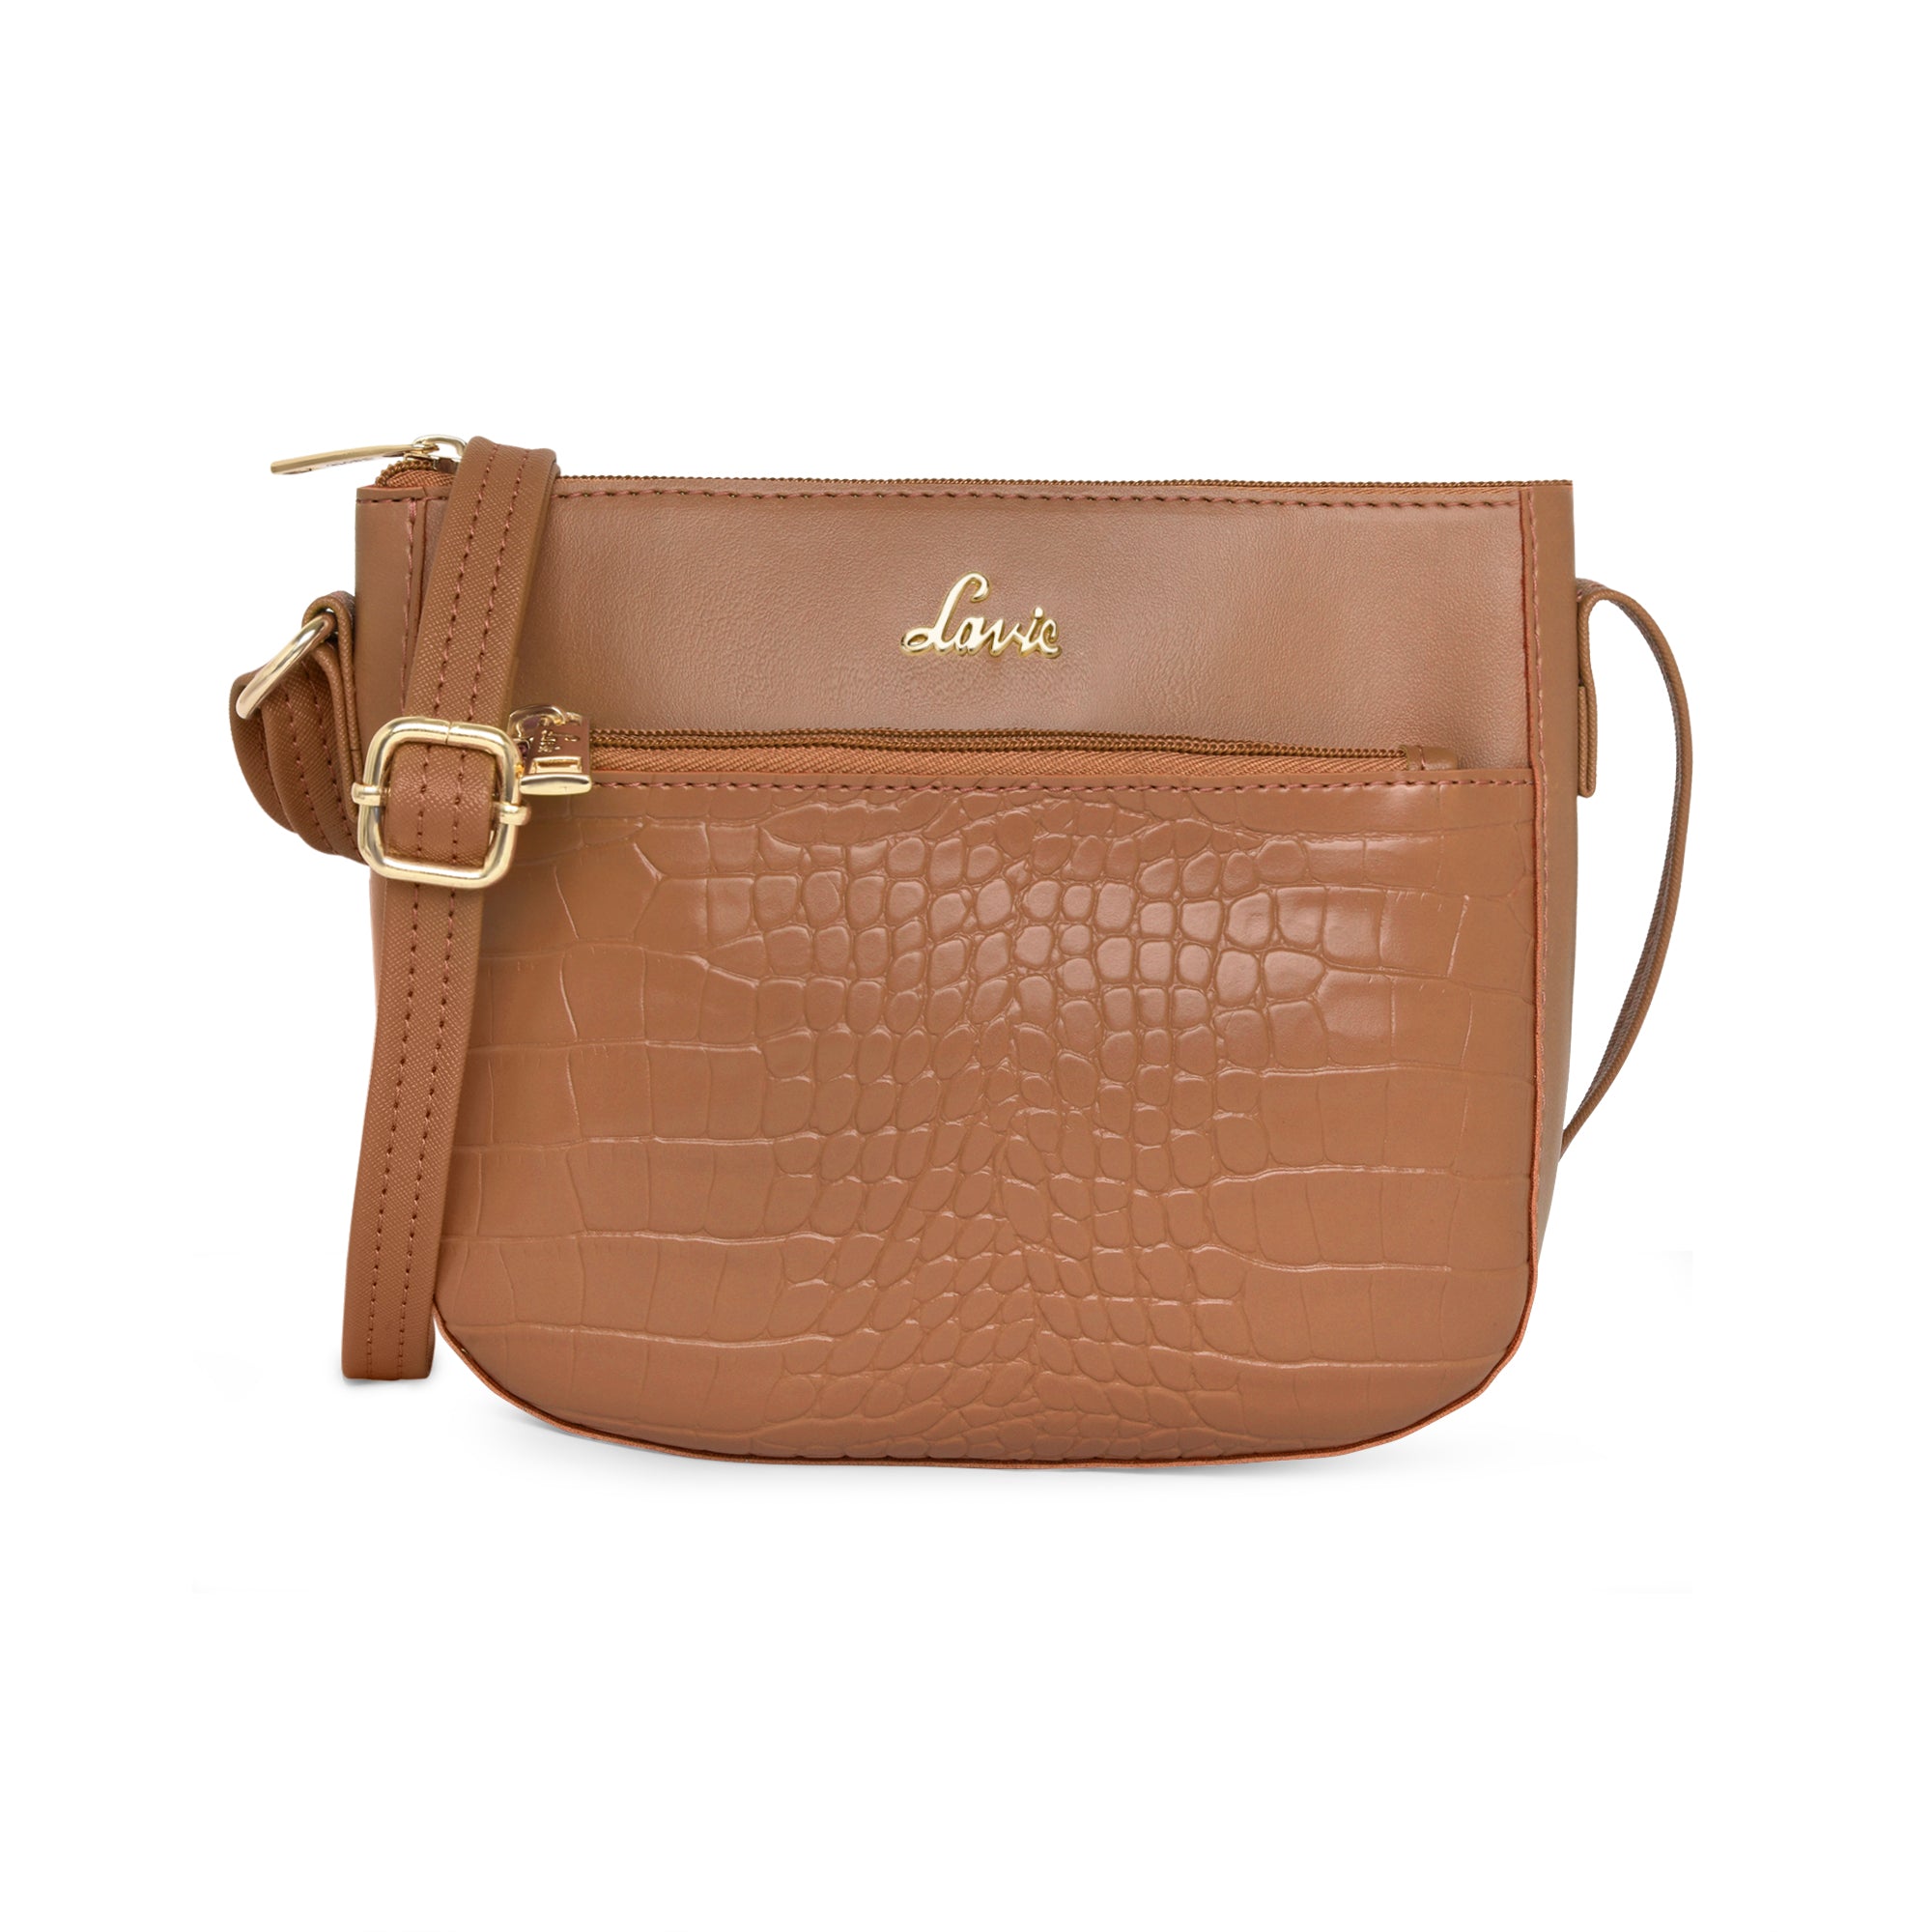 Luxury LOCKME EVER TOTE Lavie Handbags Casual Design For Women, Shoulder  Crossbody Messenger Bag With Top Mirror Quality M20997 M234K From Hahaa11,  $240.43 | DHgate.Com